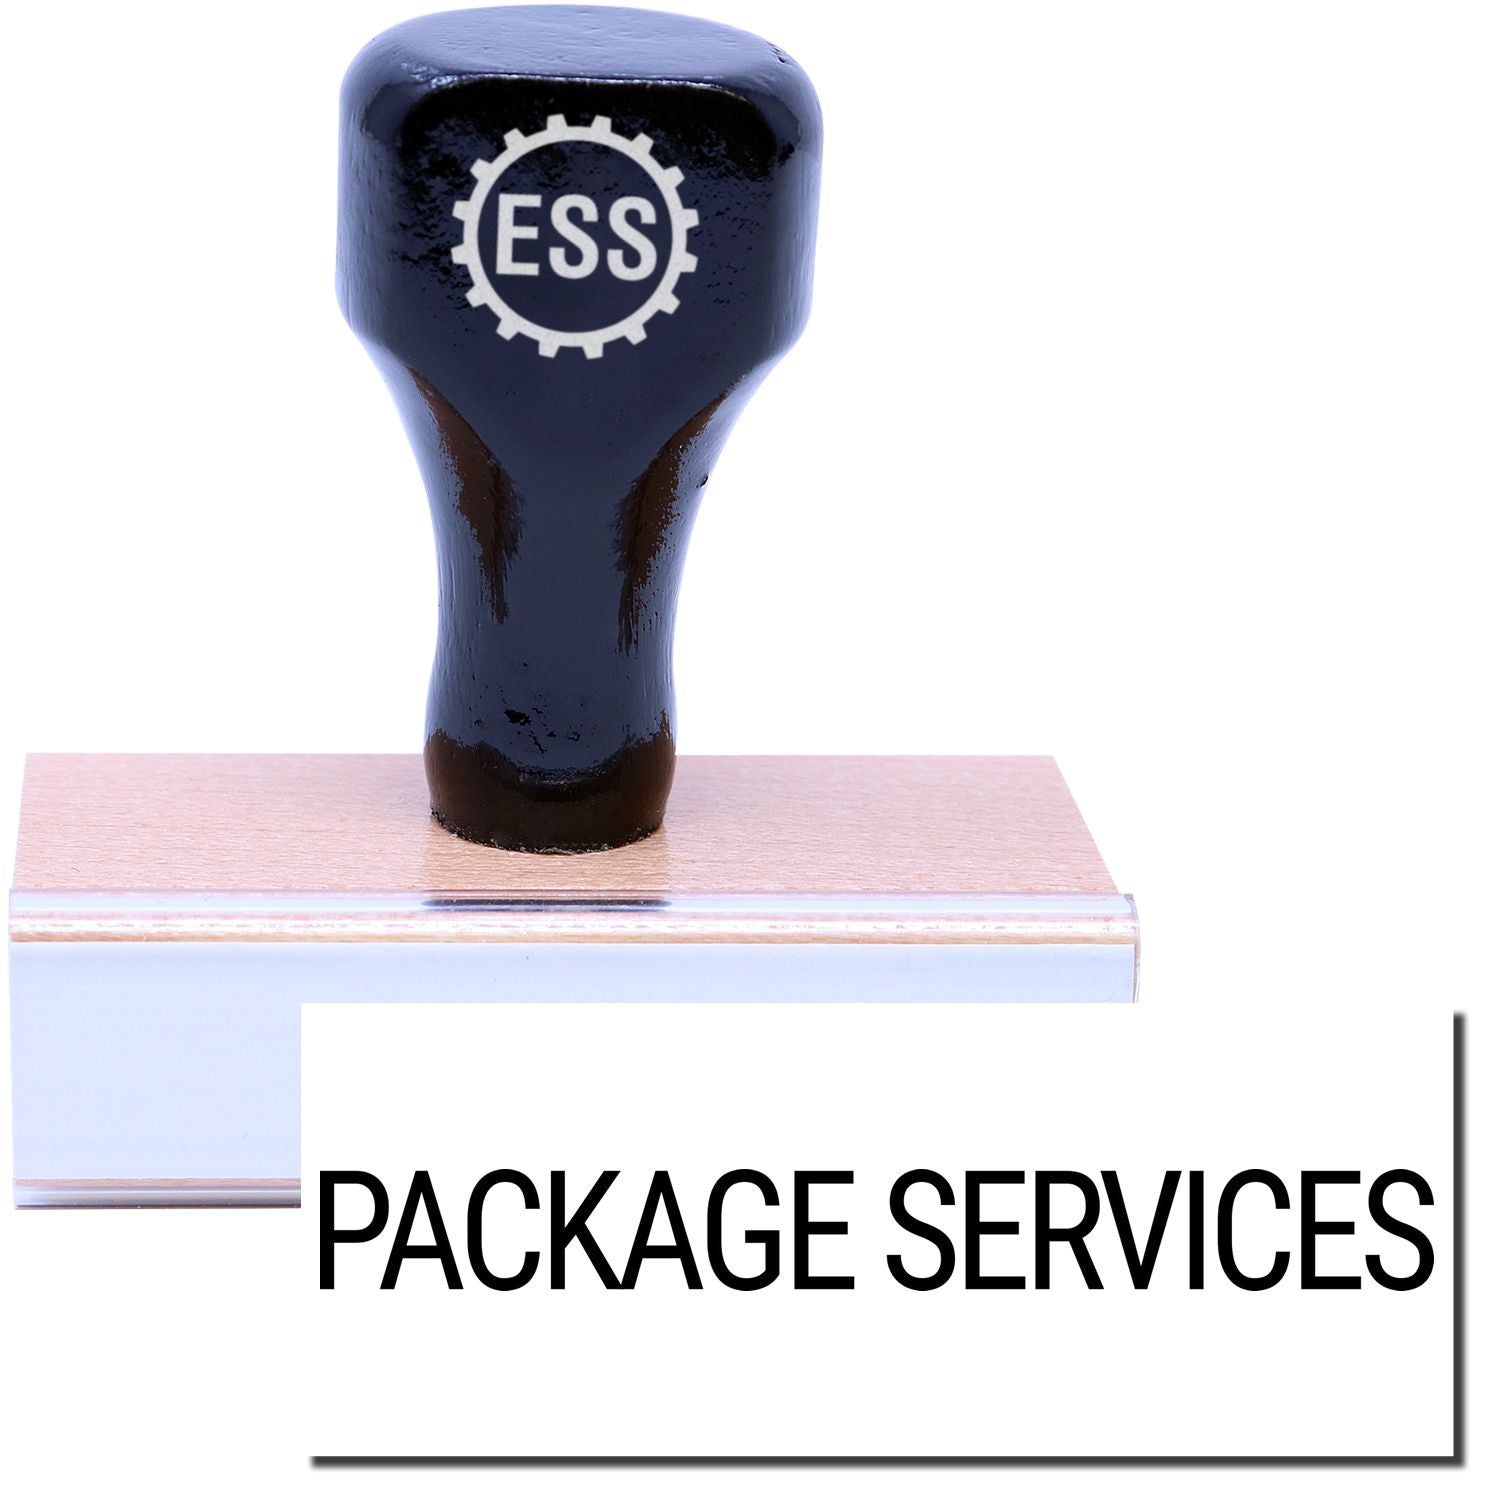 A stock office rubber stamp with a stamped image showing how the text "PACKAGE SERVICES" in a large font is displayed after stamping.